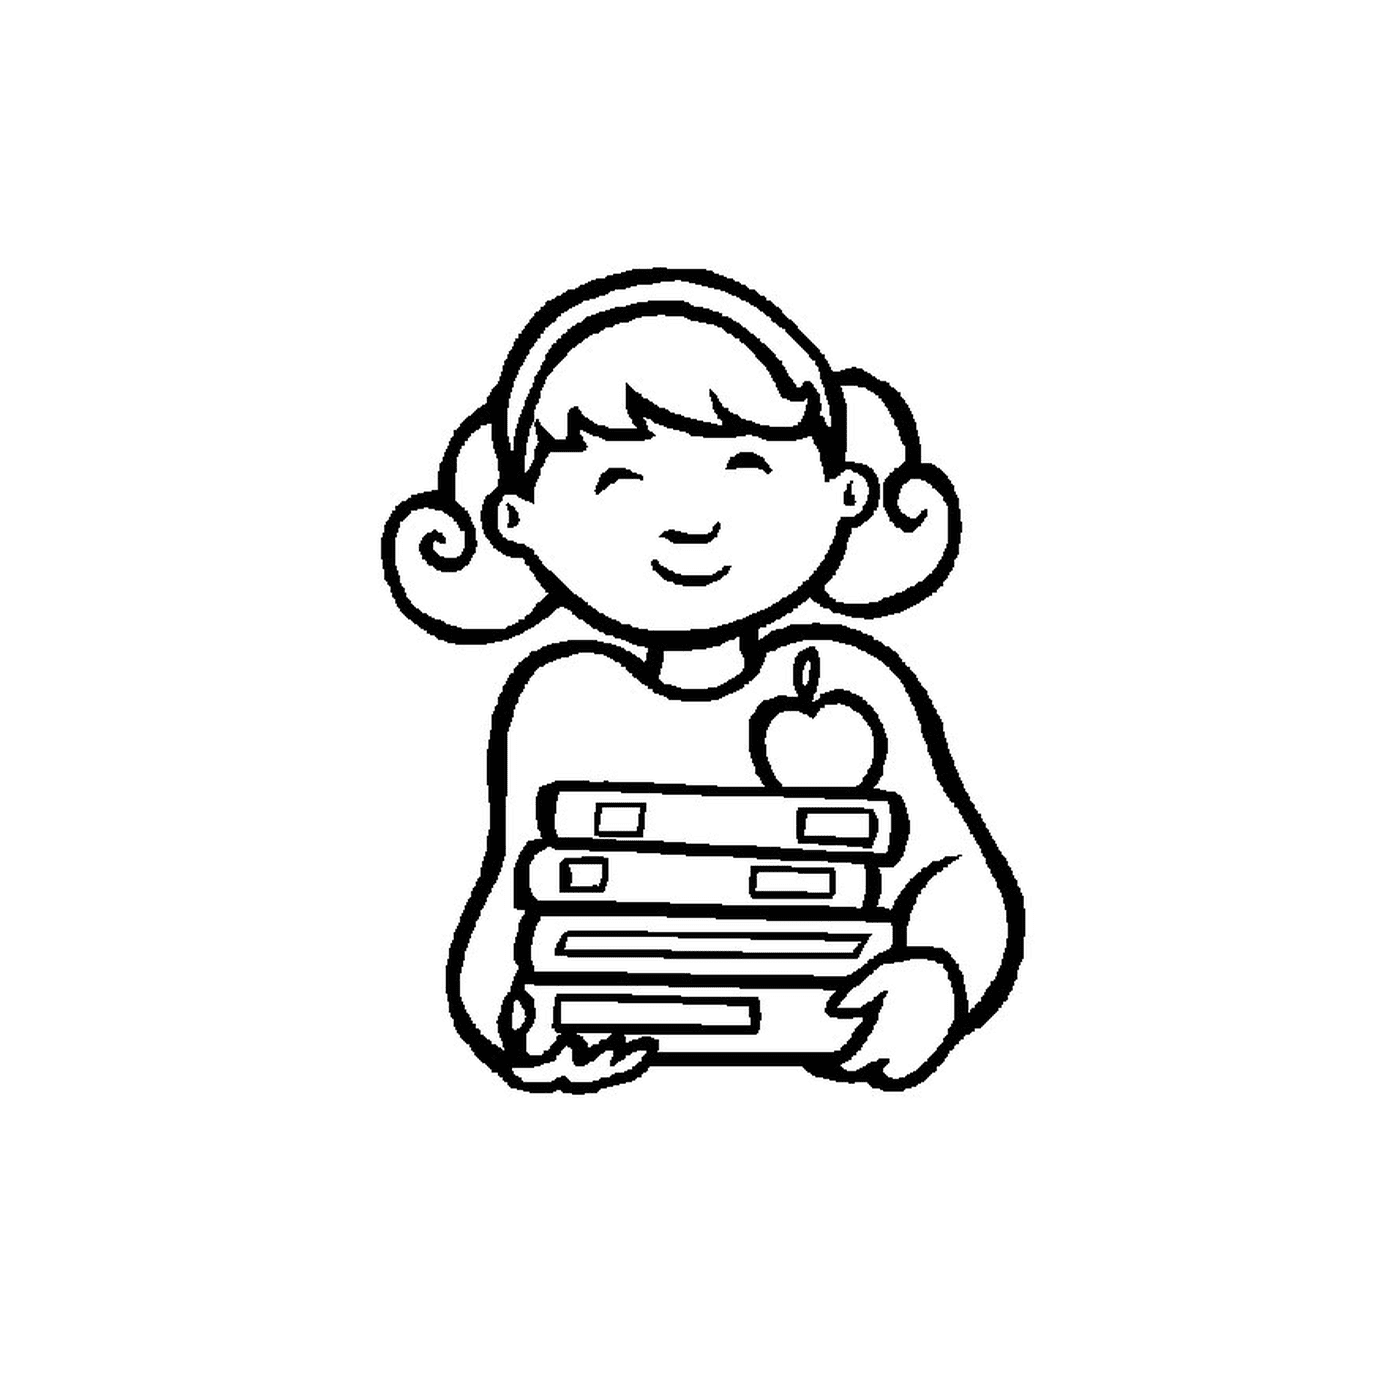  Little girl holding a pile of books 